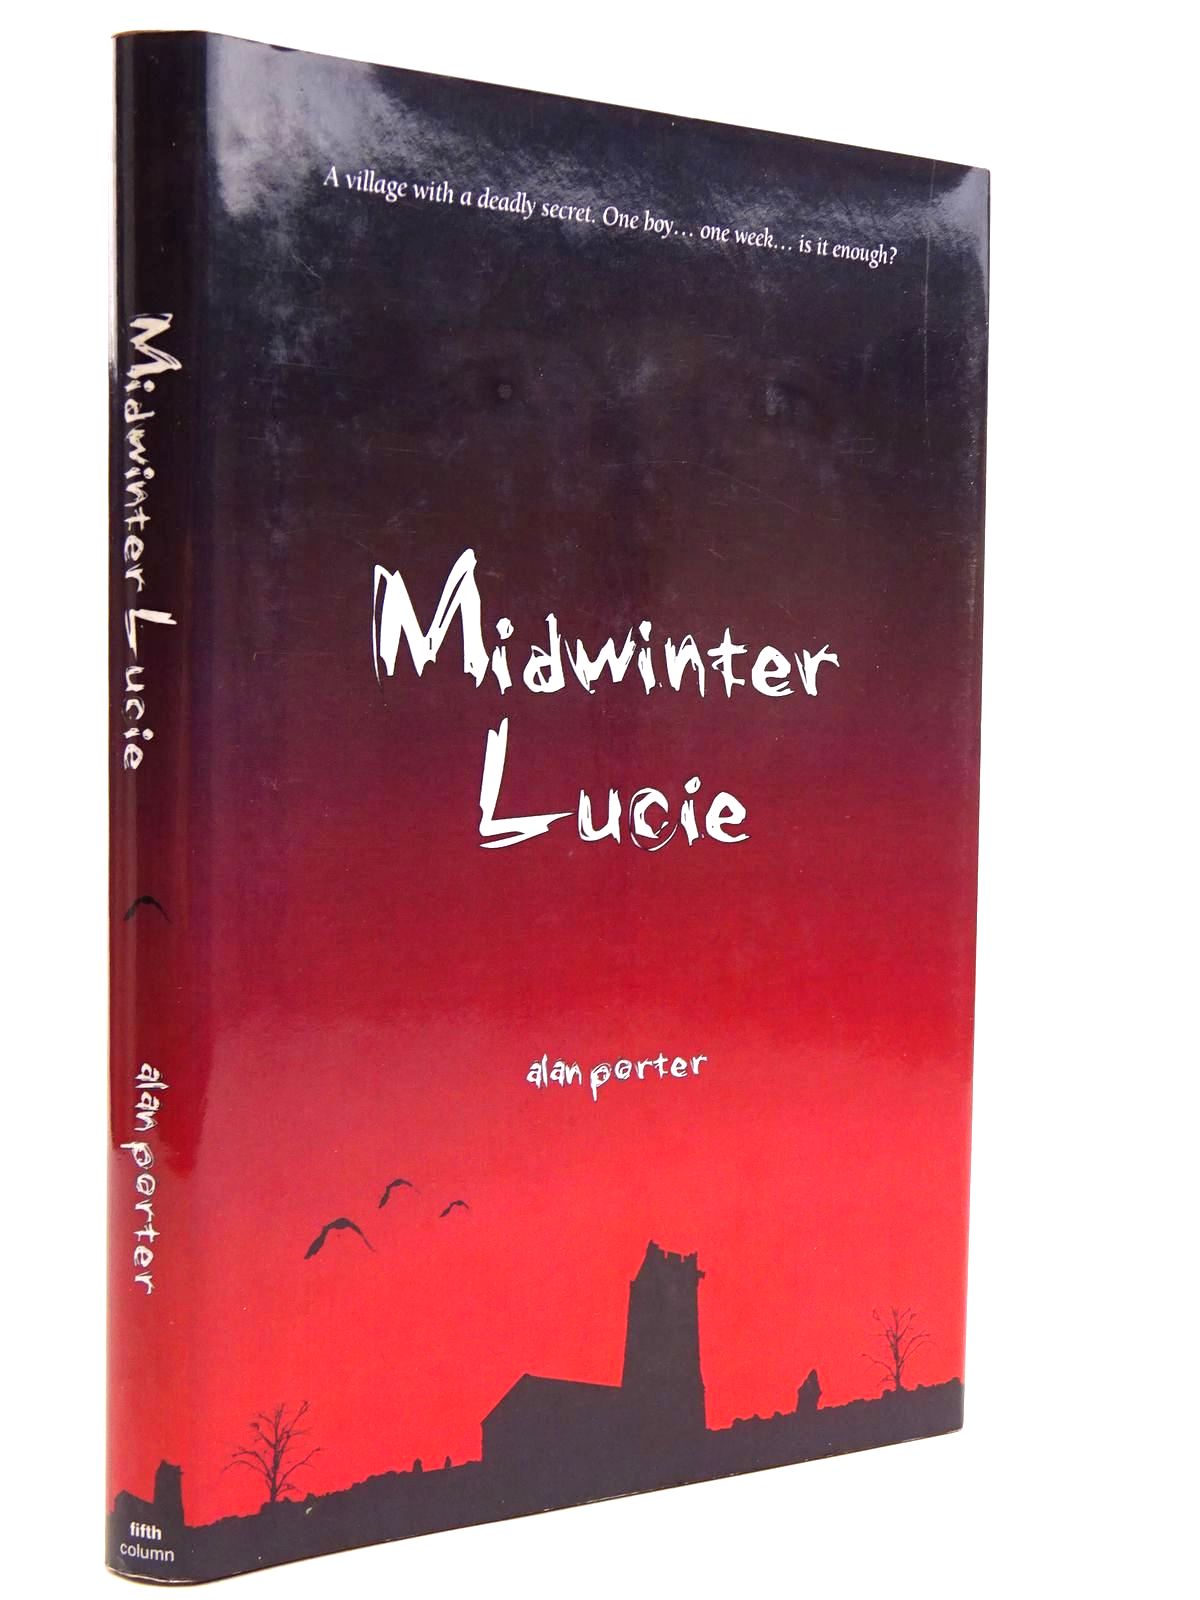 Photo of MIDWINTER LUCIE written by Porter, Alan published by Fifth Column (STOCK CODE: 2131663)  for sale by Stella & Rose's Books